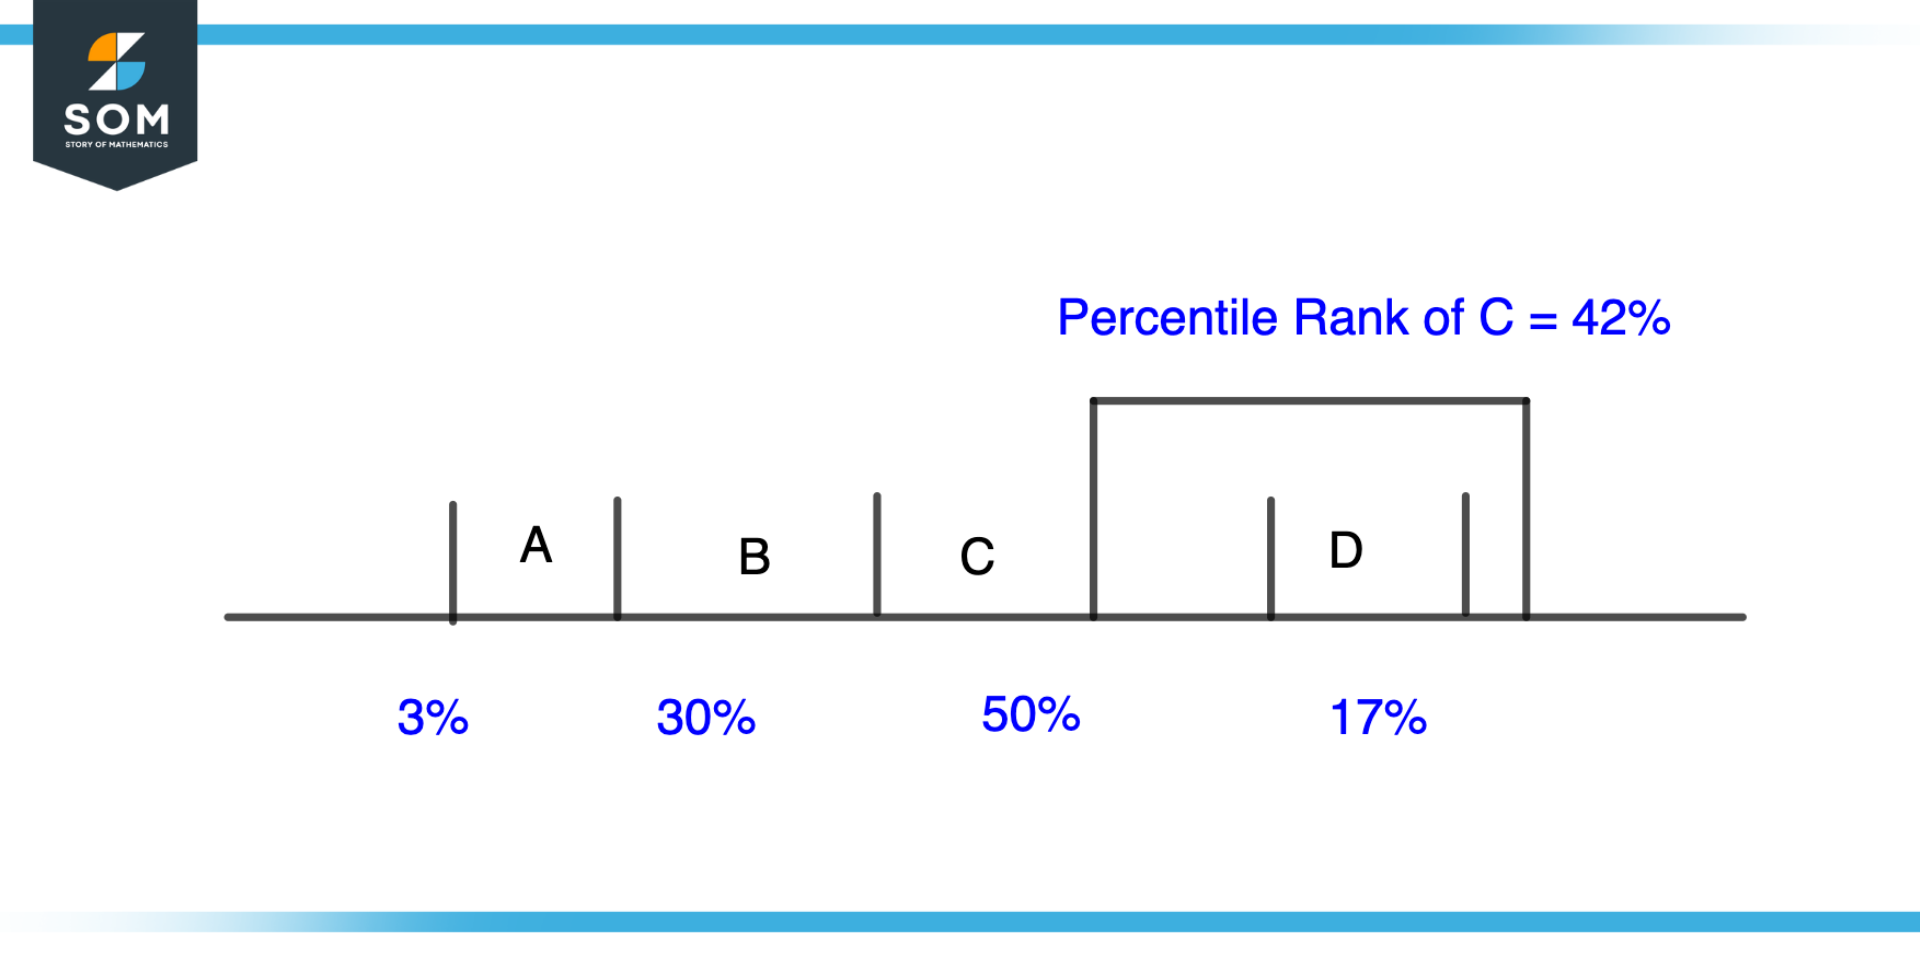 Percentile Rank Overview